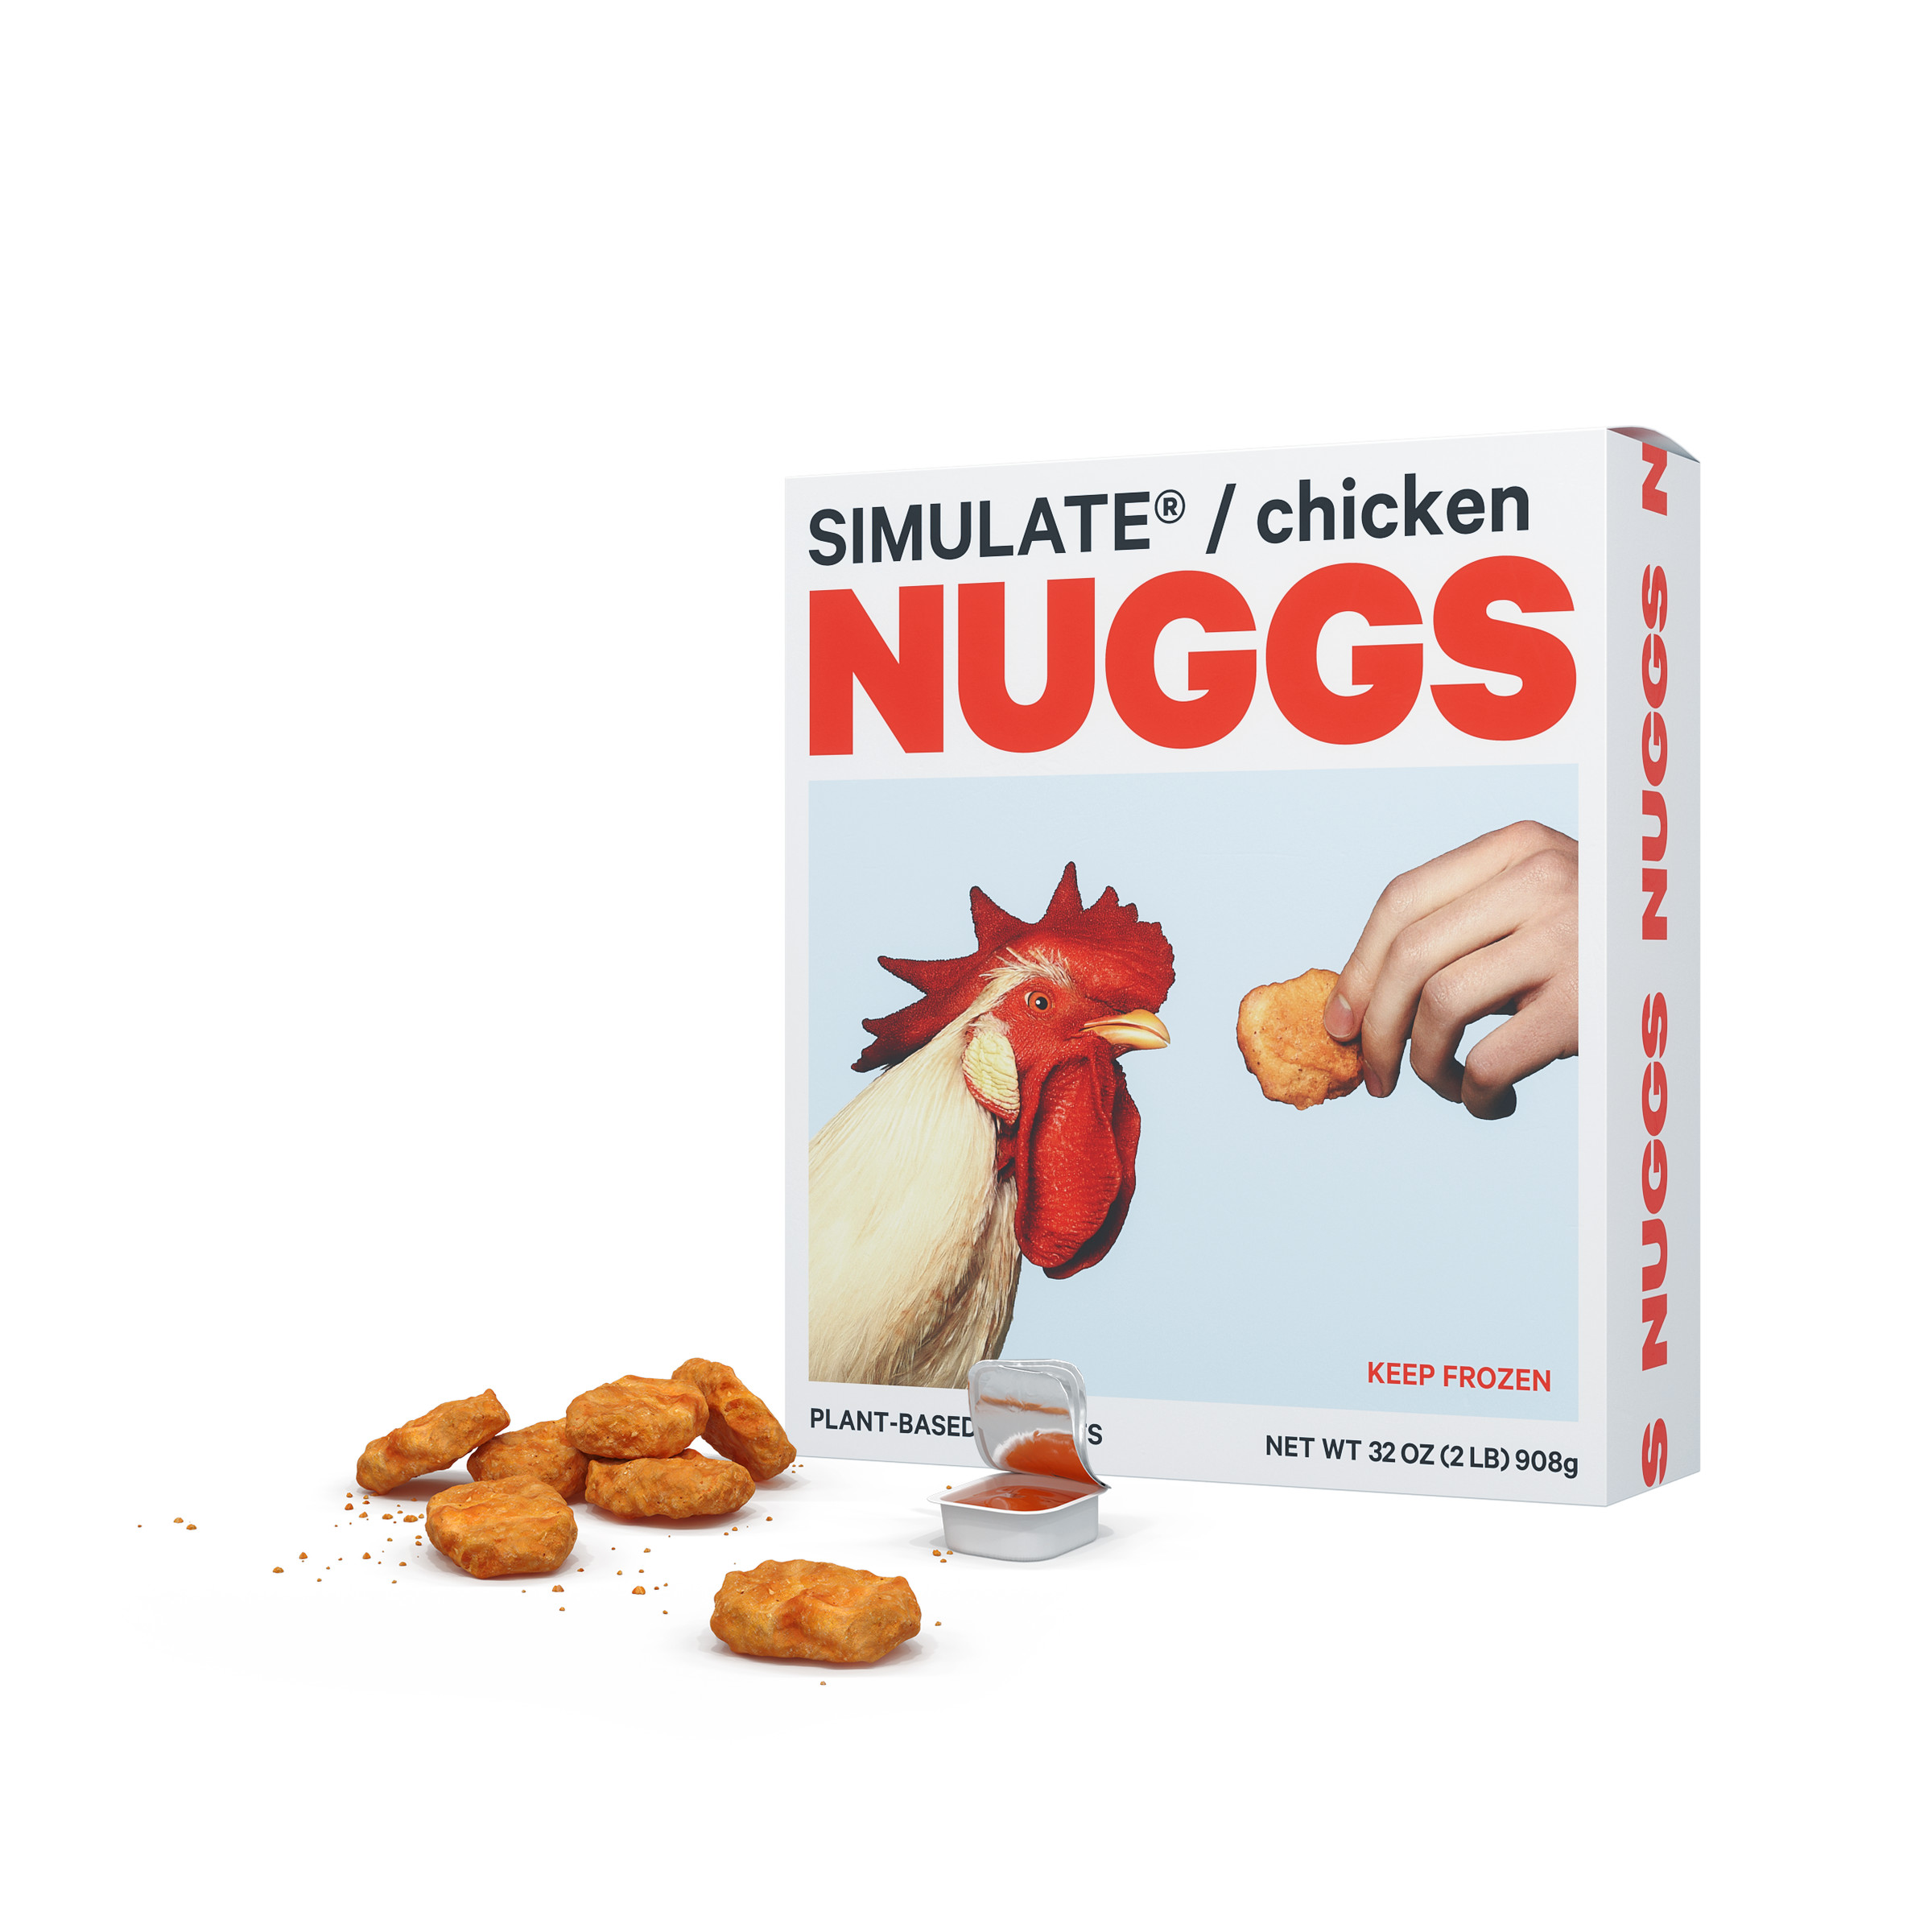 Some nuggets sitting in front of a Nuggs box, which has an image of a chicken being offered a nugget.